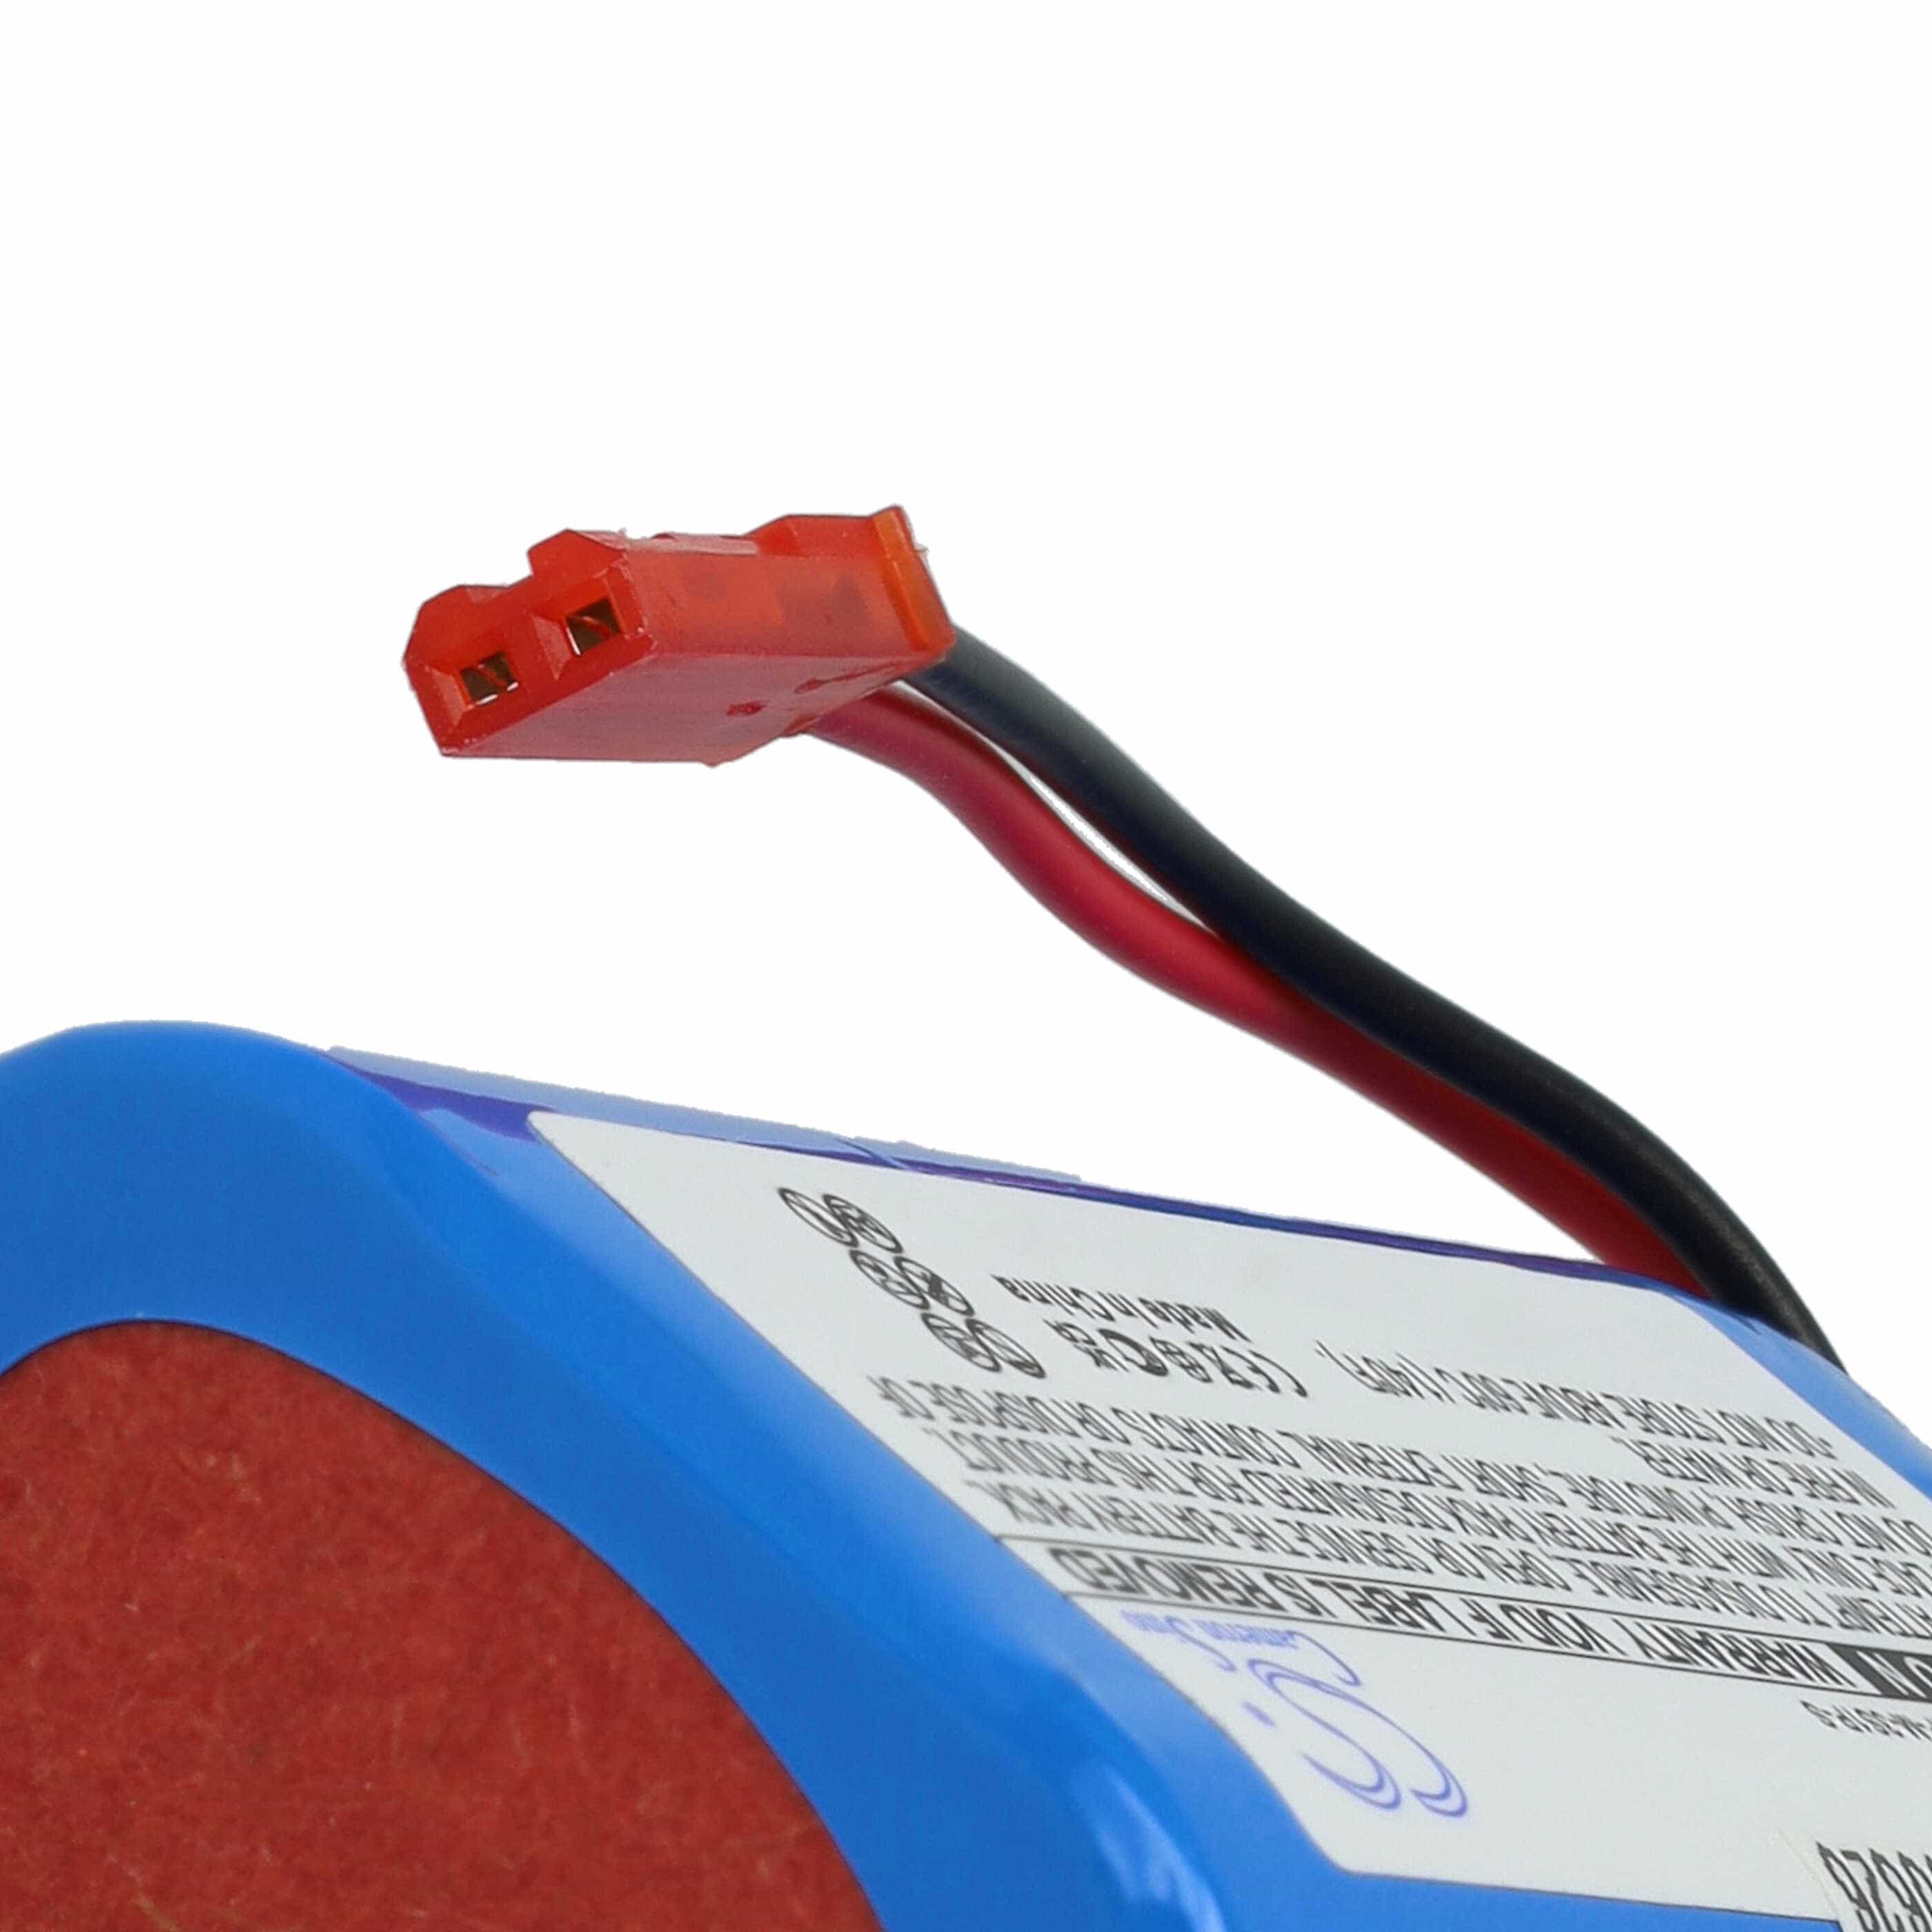 Battery Replacement for Medion ICP186500-15F-M-3S1P-S for - 2600mAh, 11.1V, Li-Ion